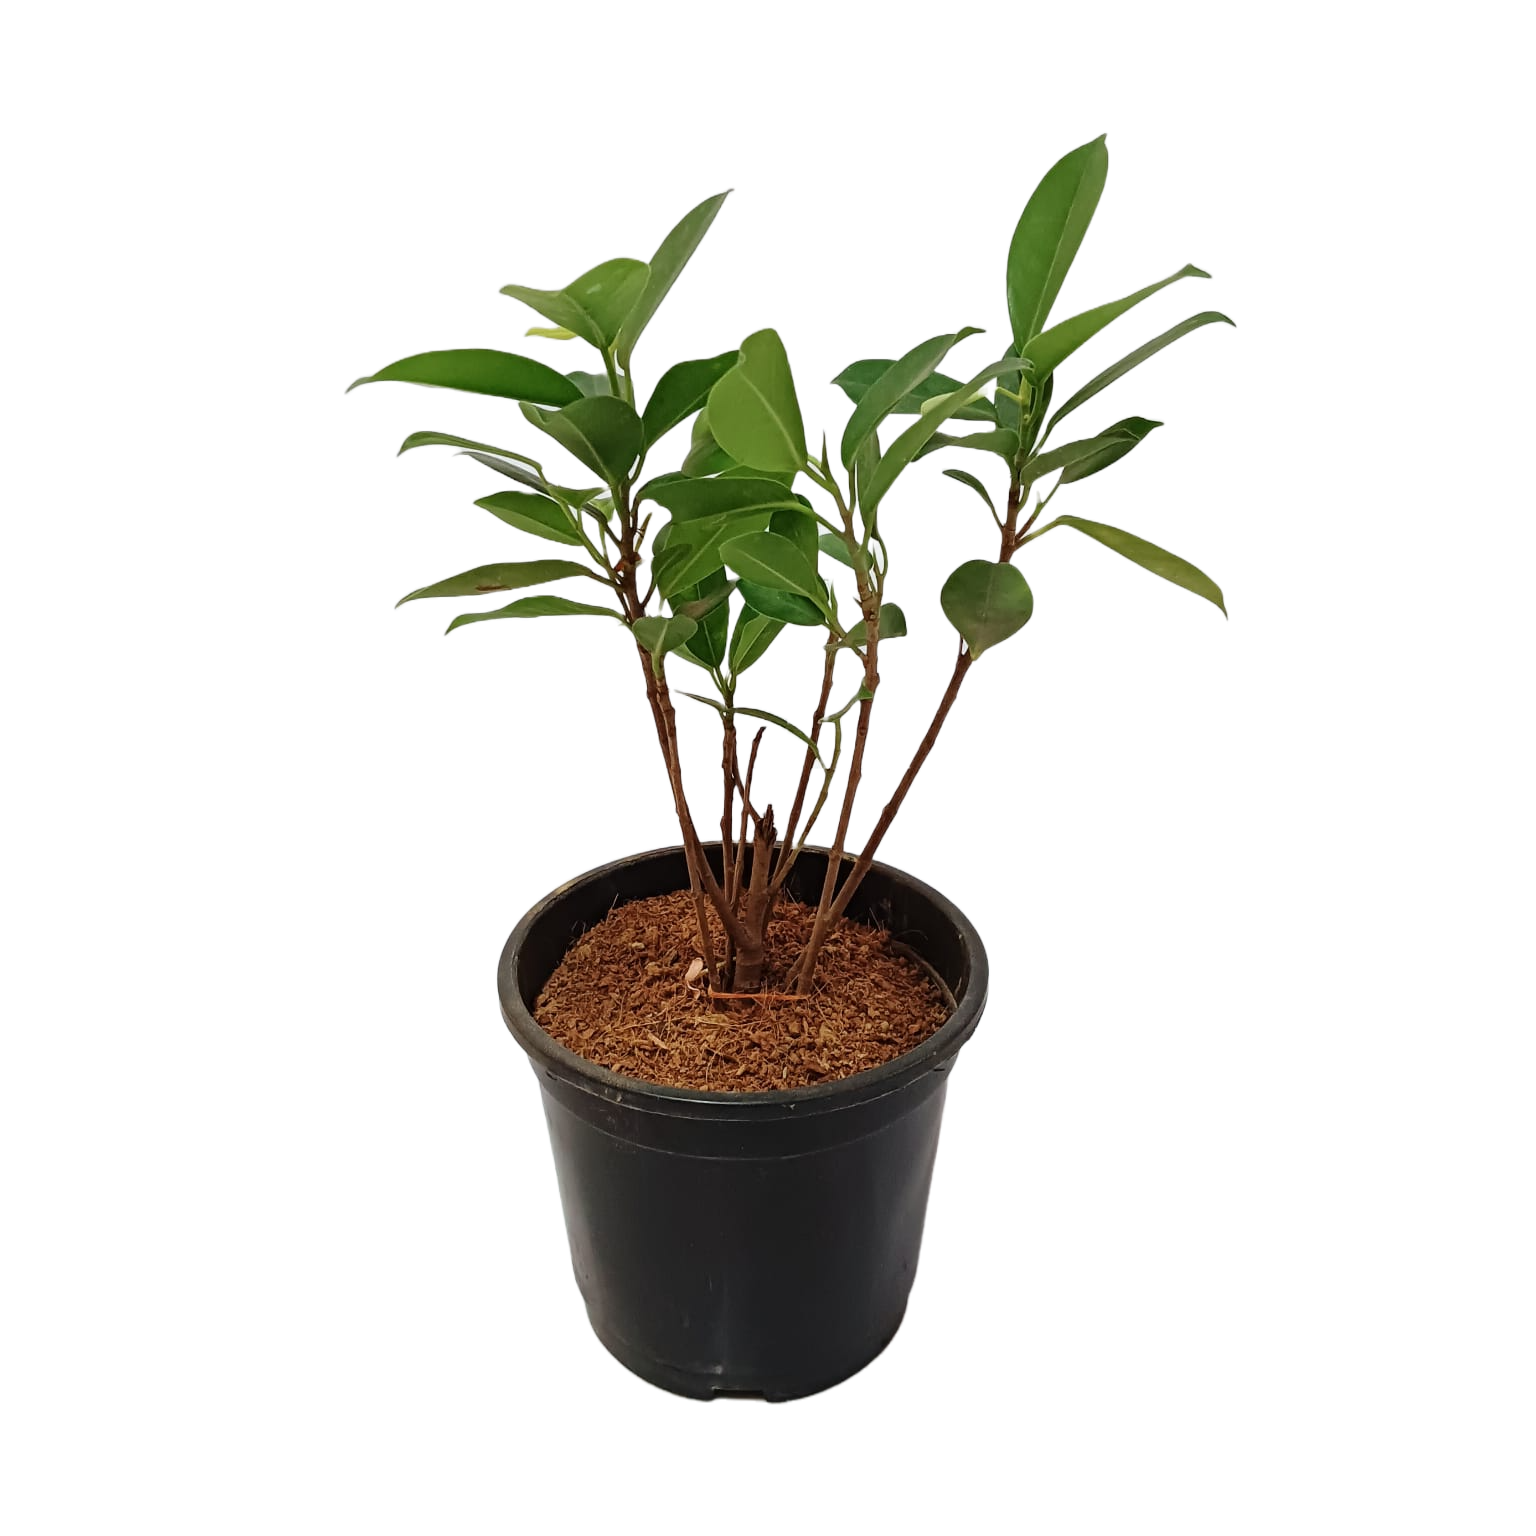 Shop Panda Fig online - easy plant shopping, Buy Ficus Panda for home and office online, Purchase Panda Fig tree with just a click, Ficus Panda online - bring unique nature to your space, Order your Panda Fig plant hassle-free